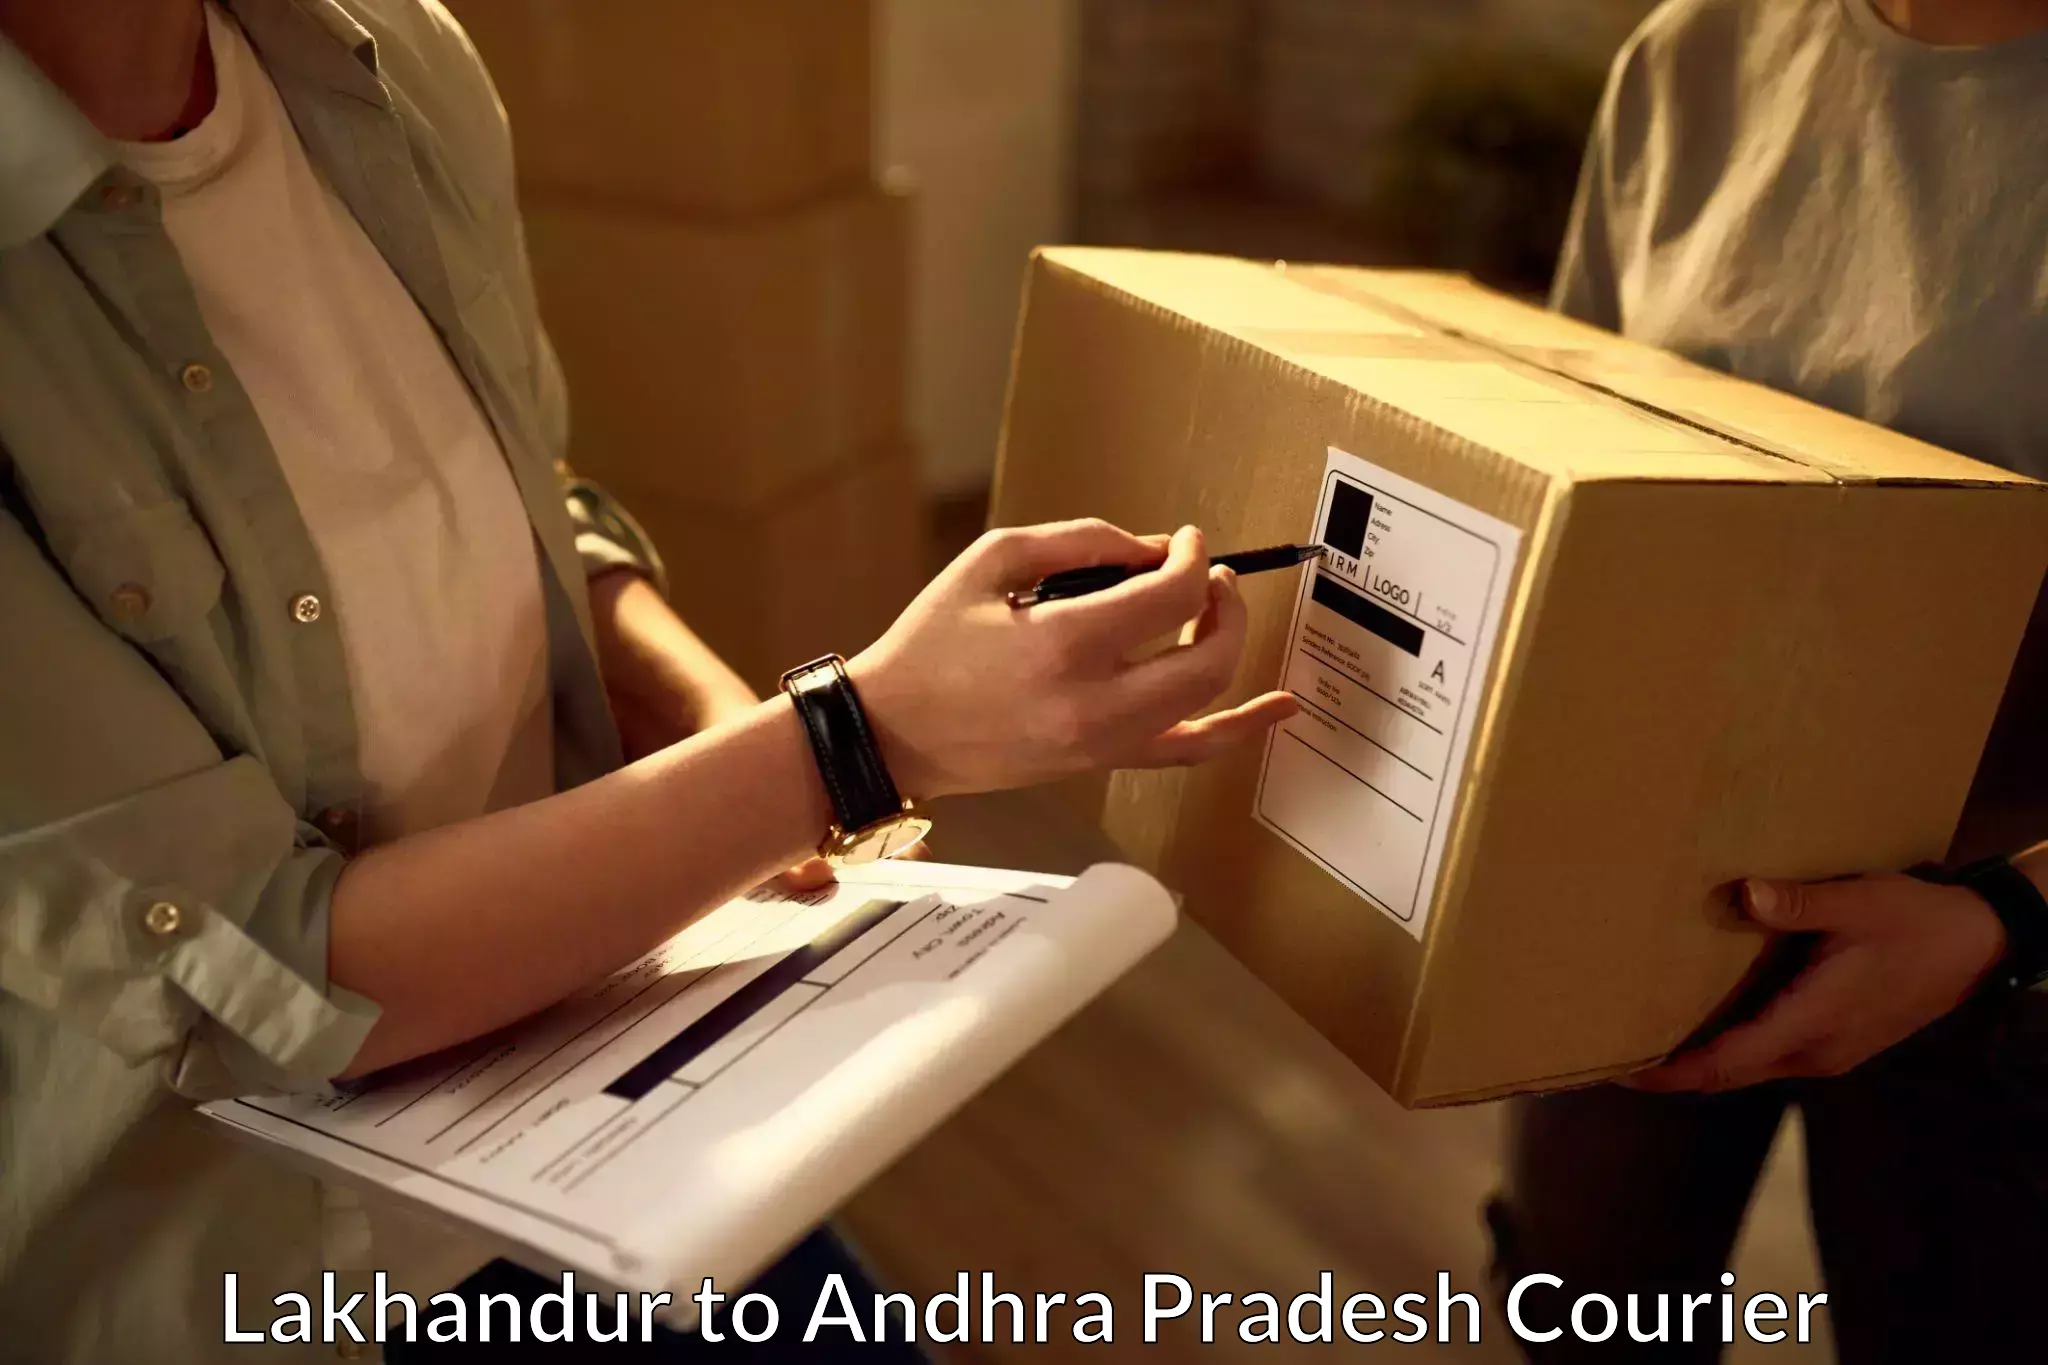 User-friendly delivery service Lakhandur to Rajahmundry